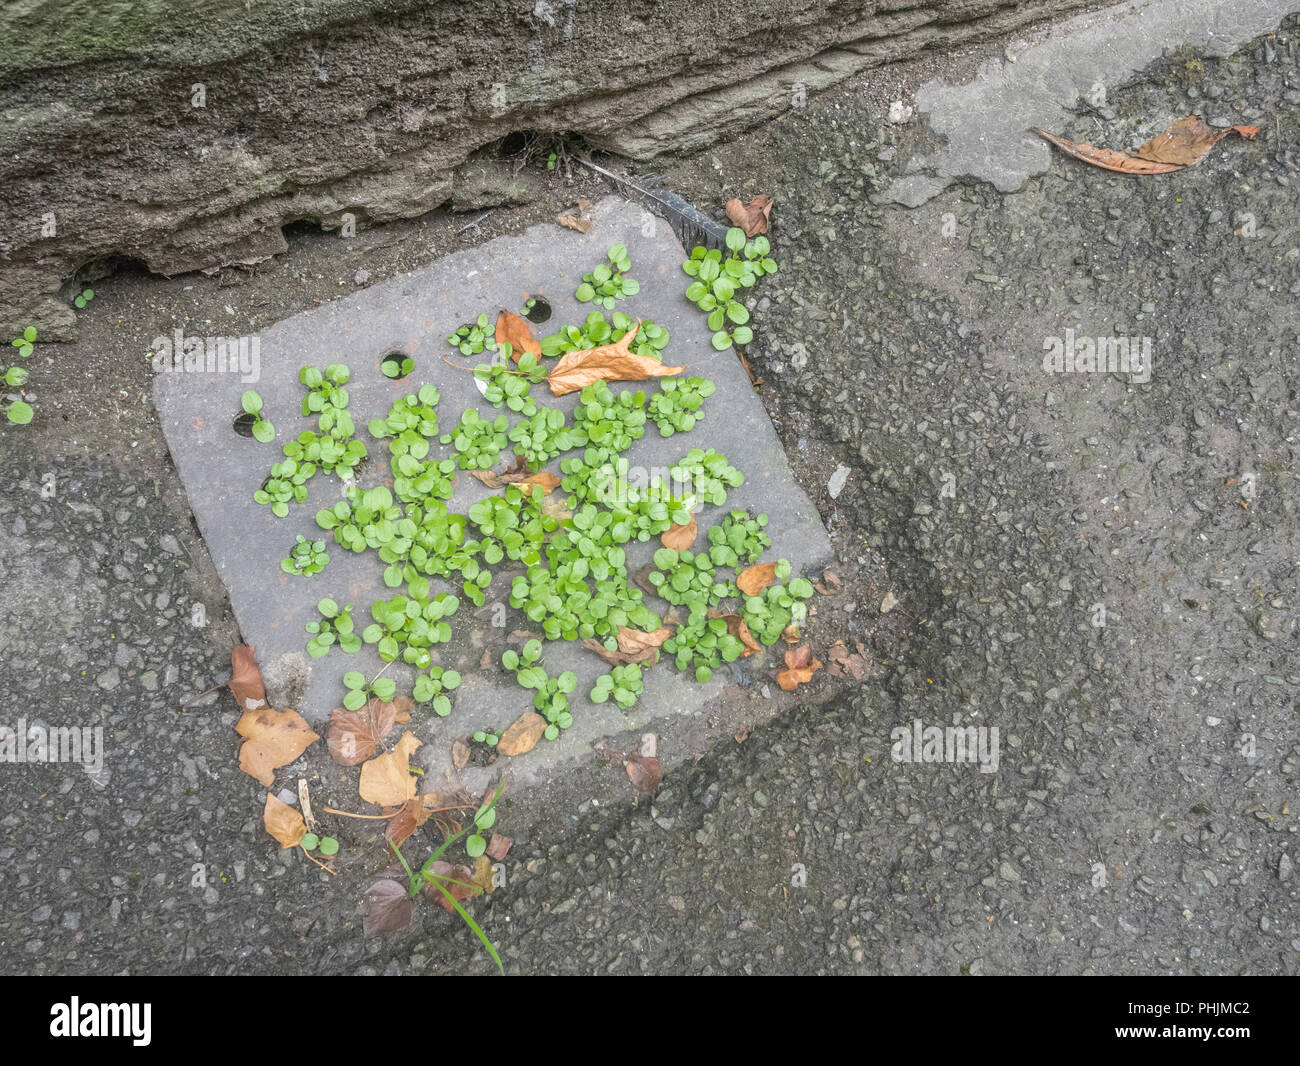 Weeds growing in a blocked drain cover in an urban environment. Weeds sprouting. Stock Photo